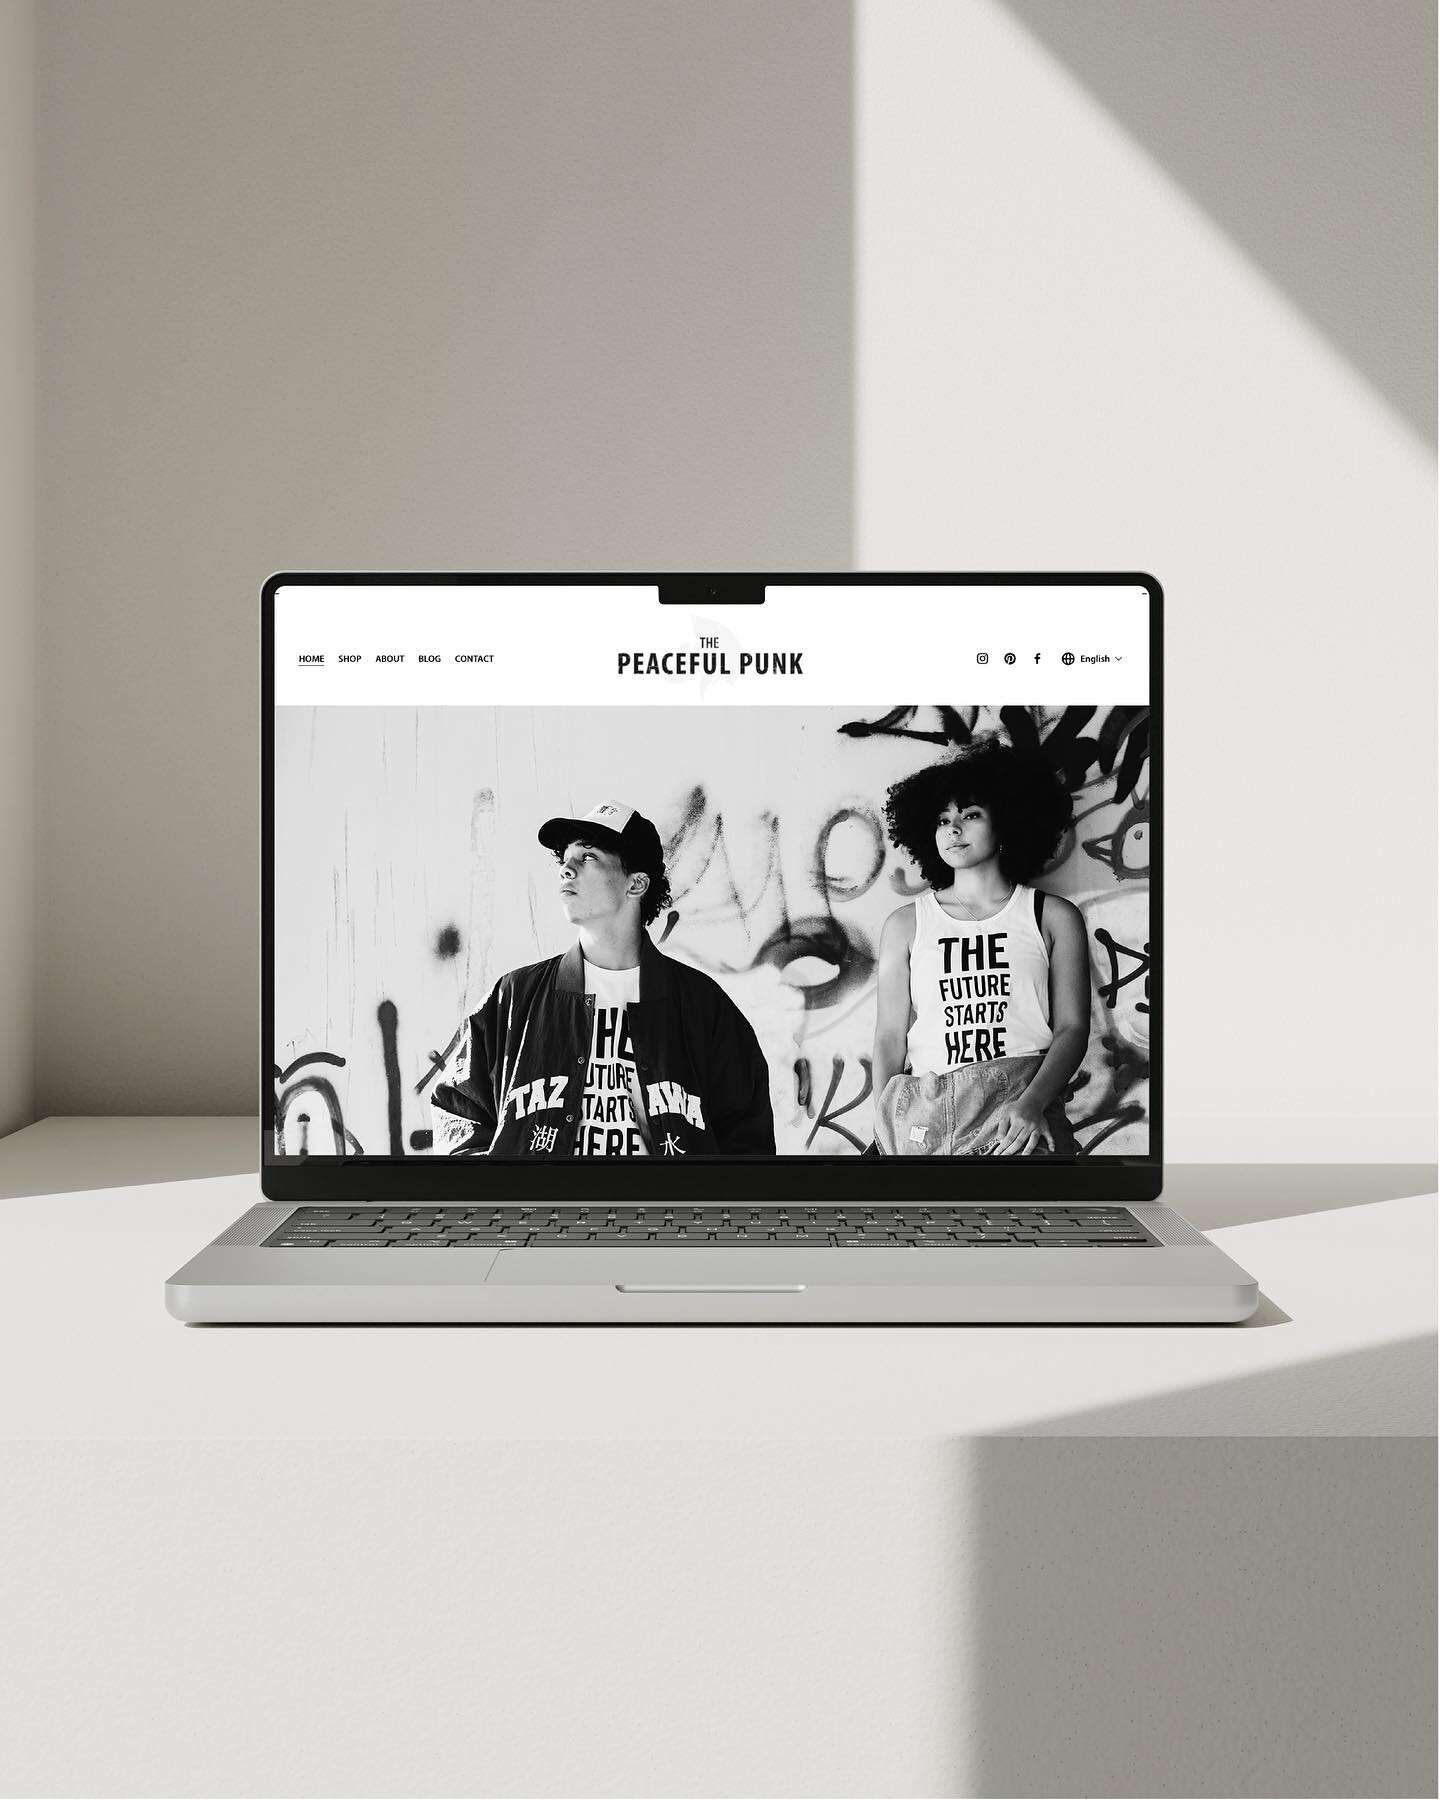 Brand identity and website design for The Peaceful Punk, an organic apparel brand with a mission to spread human kindness through conscious clothing that makes a bold statement for positive change while supporting charities they believe in. 

THE FUT